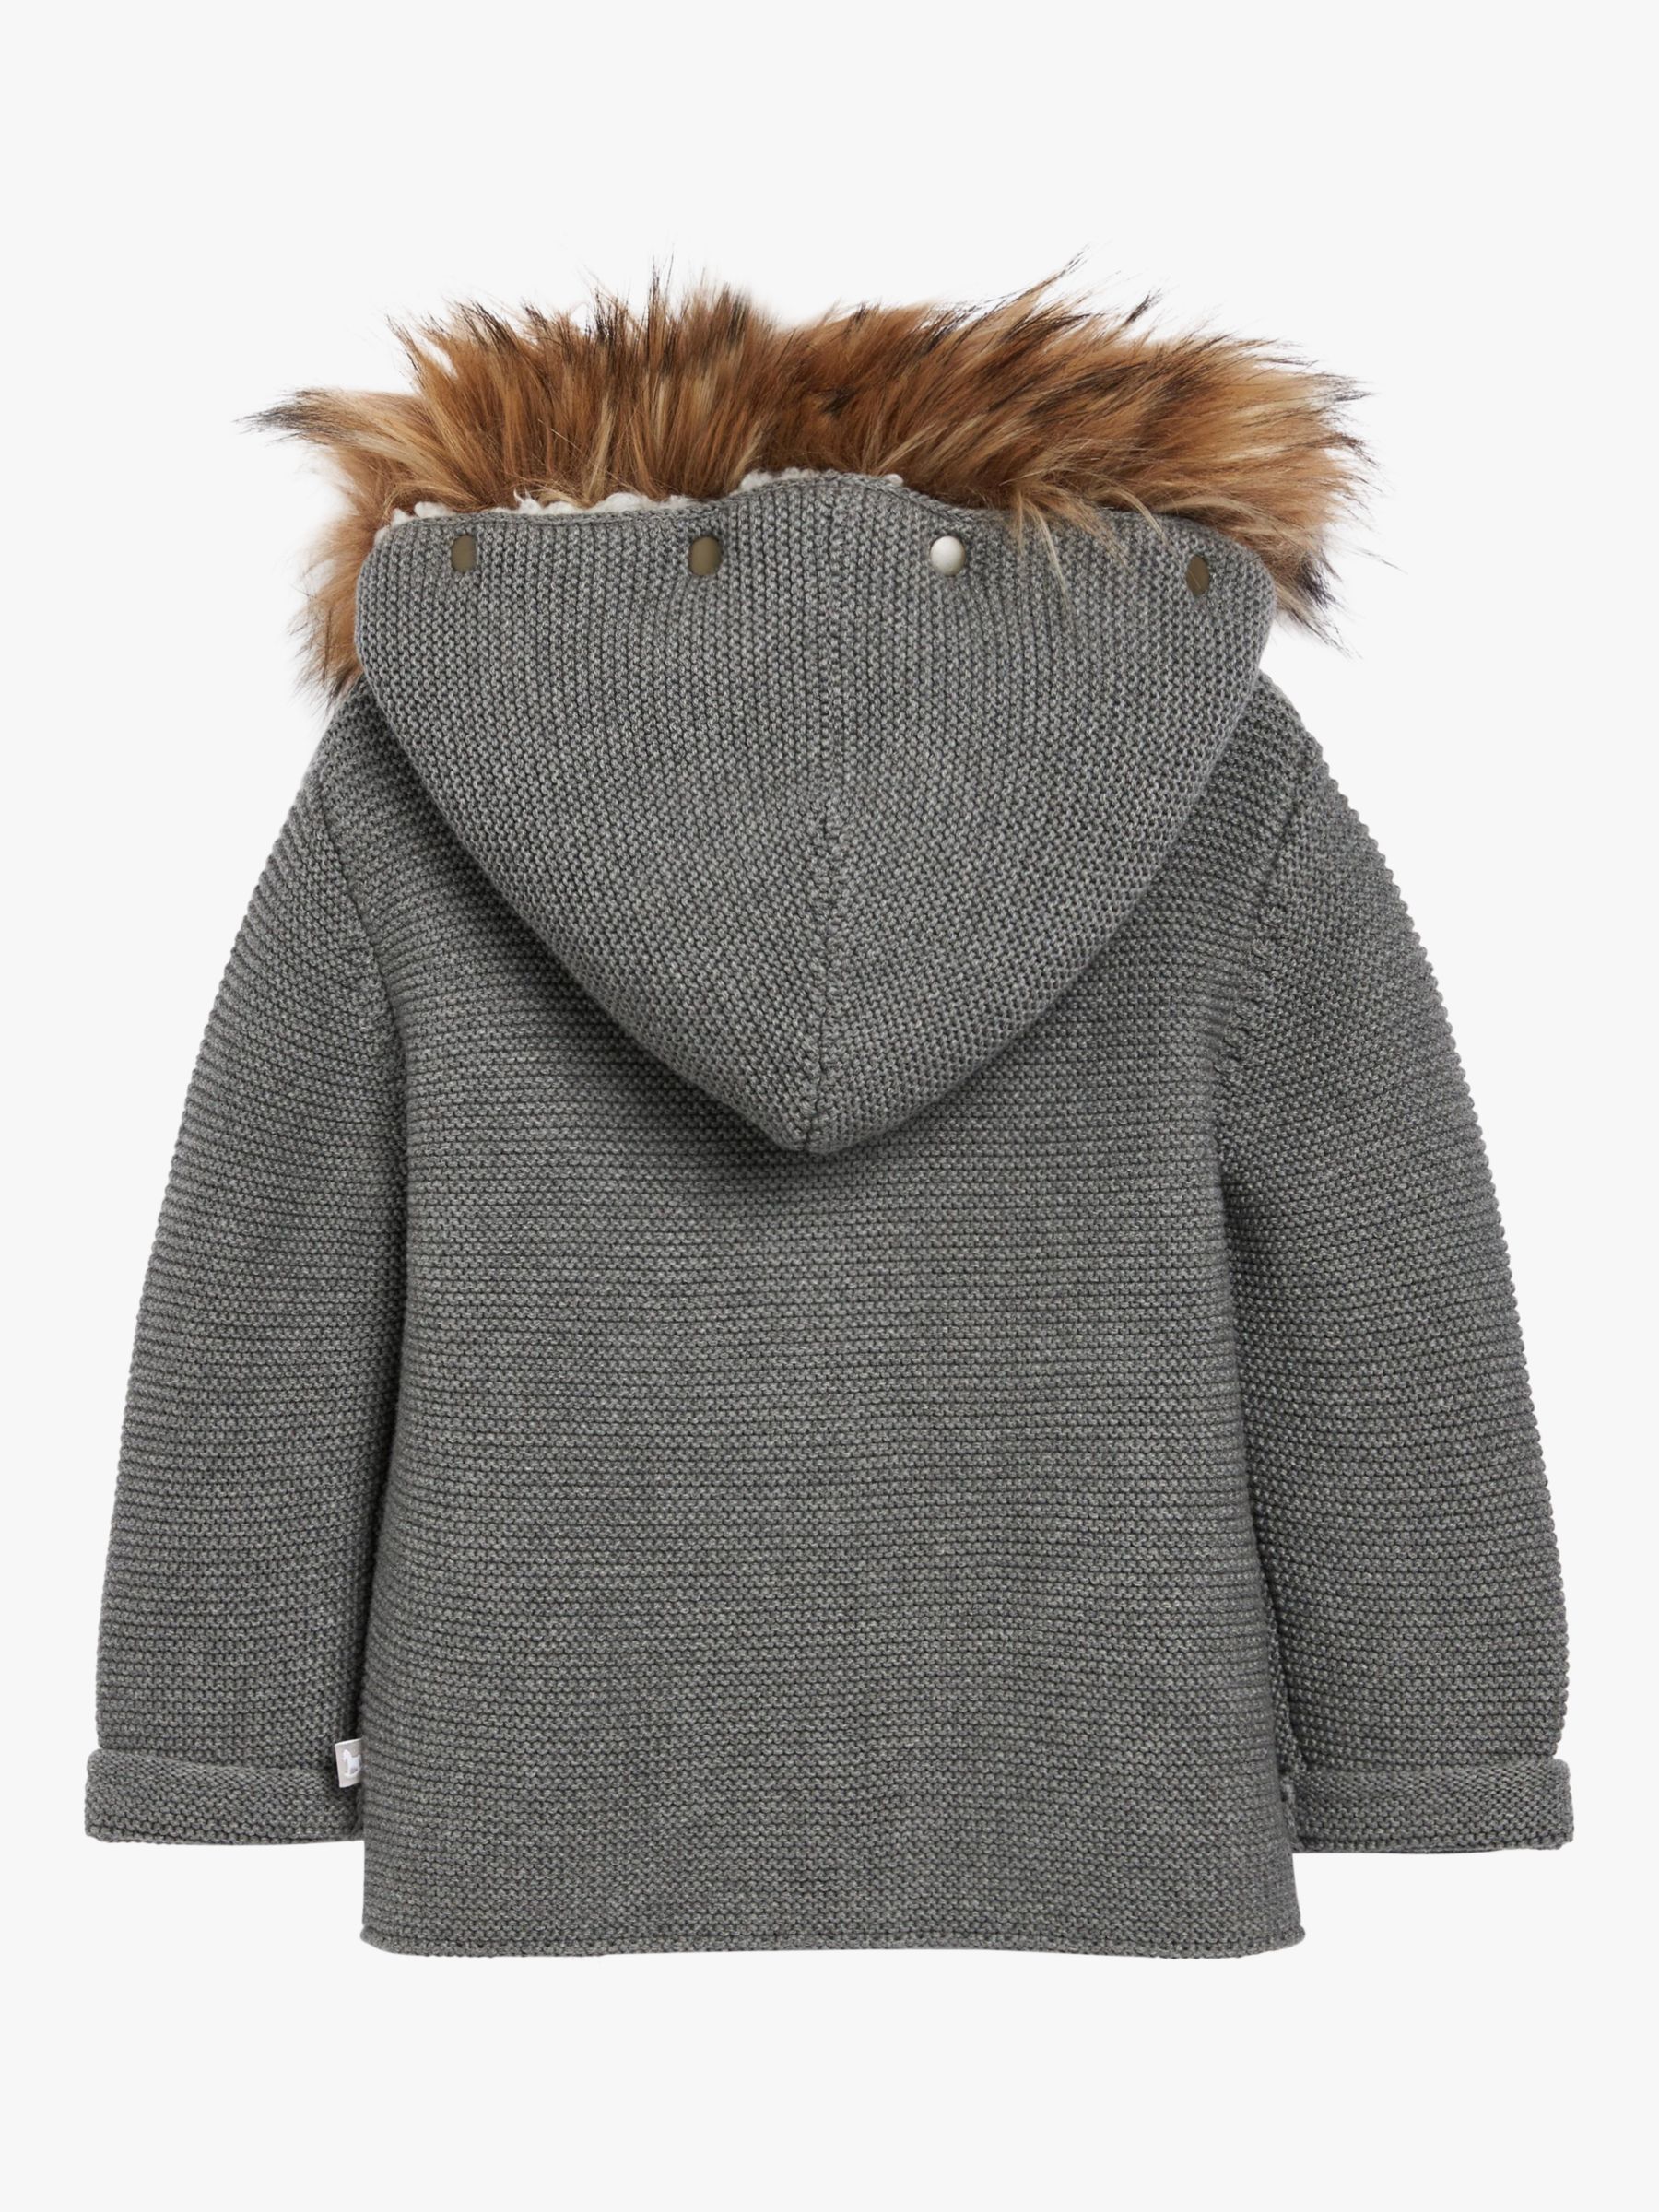 The Little Tailor Baby Faux Fur Trimmed Hooded Jacket, Charcoal, 3-6 months